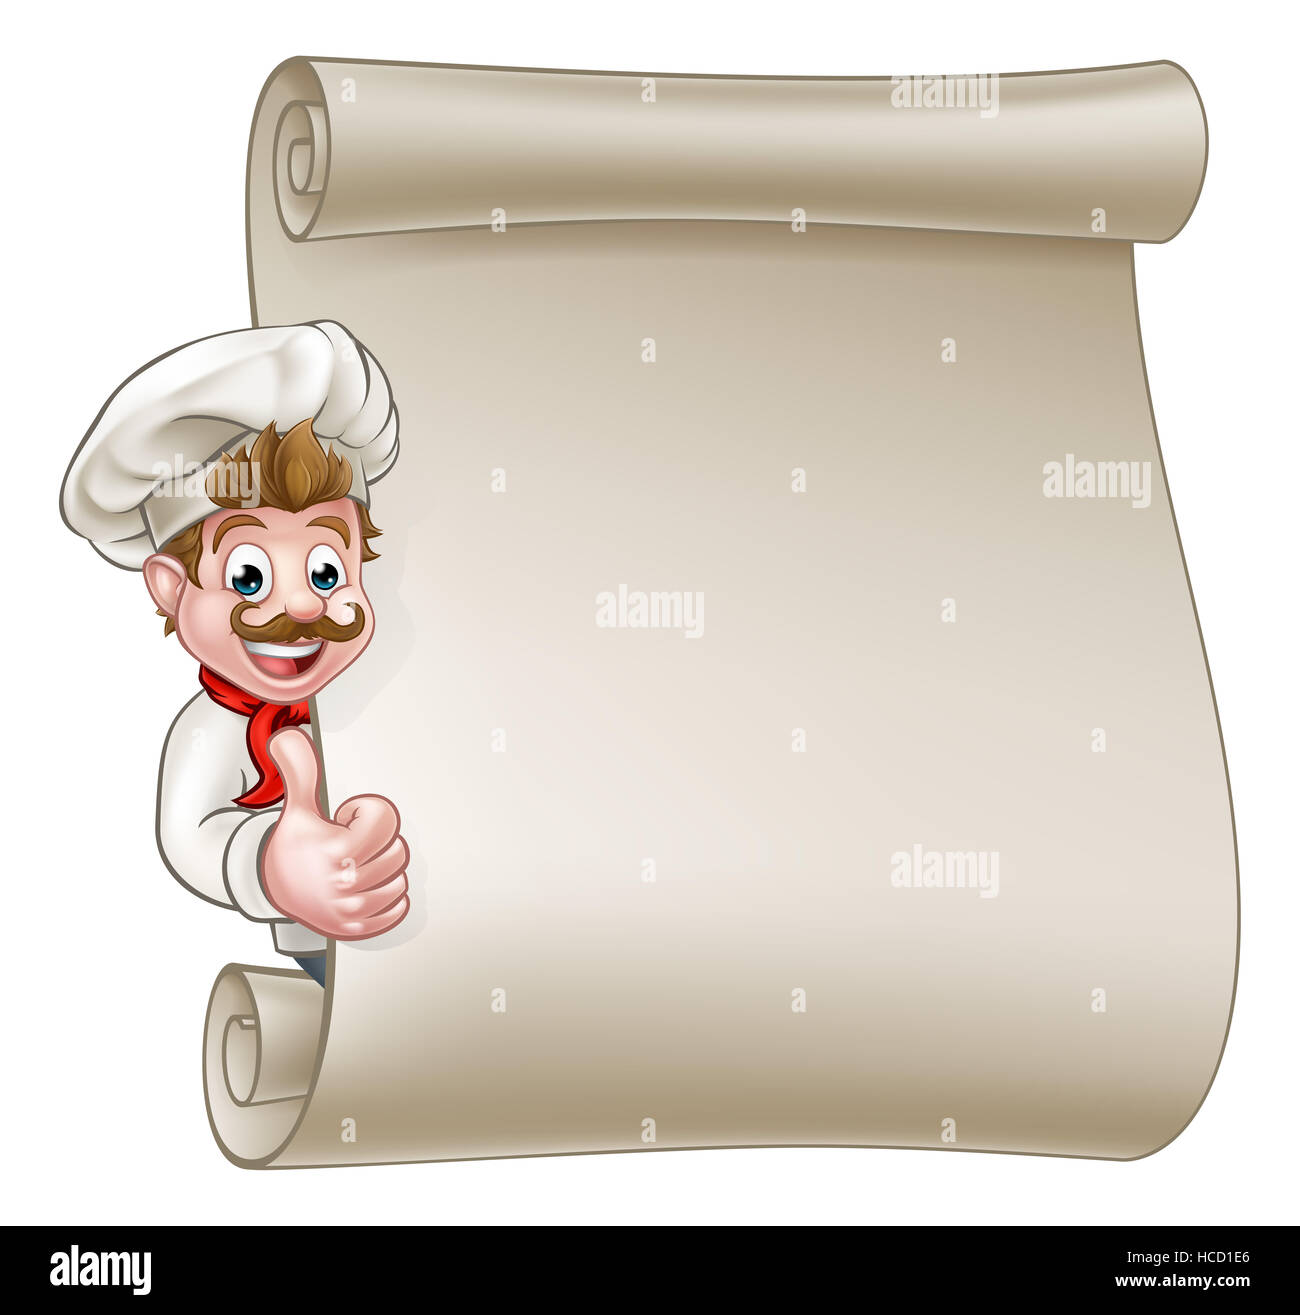 Cartoon chef or baker character giving thumbs up and peeking around sign or scroll menu Stock Photo